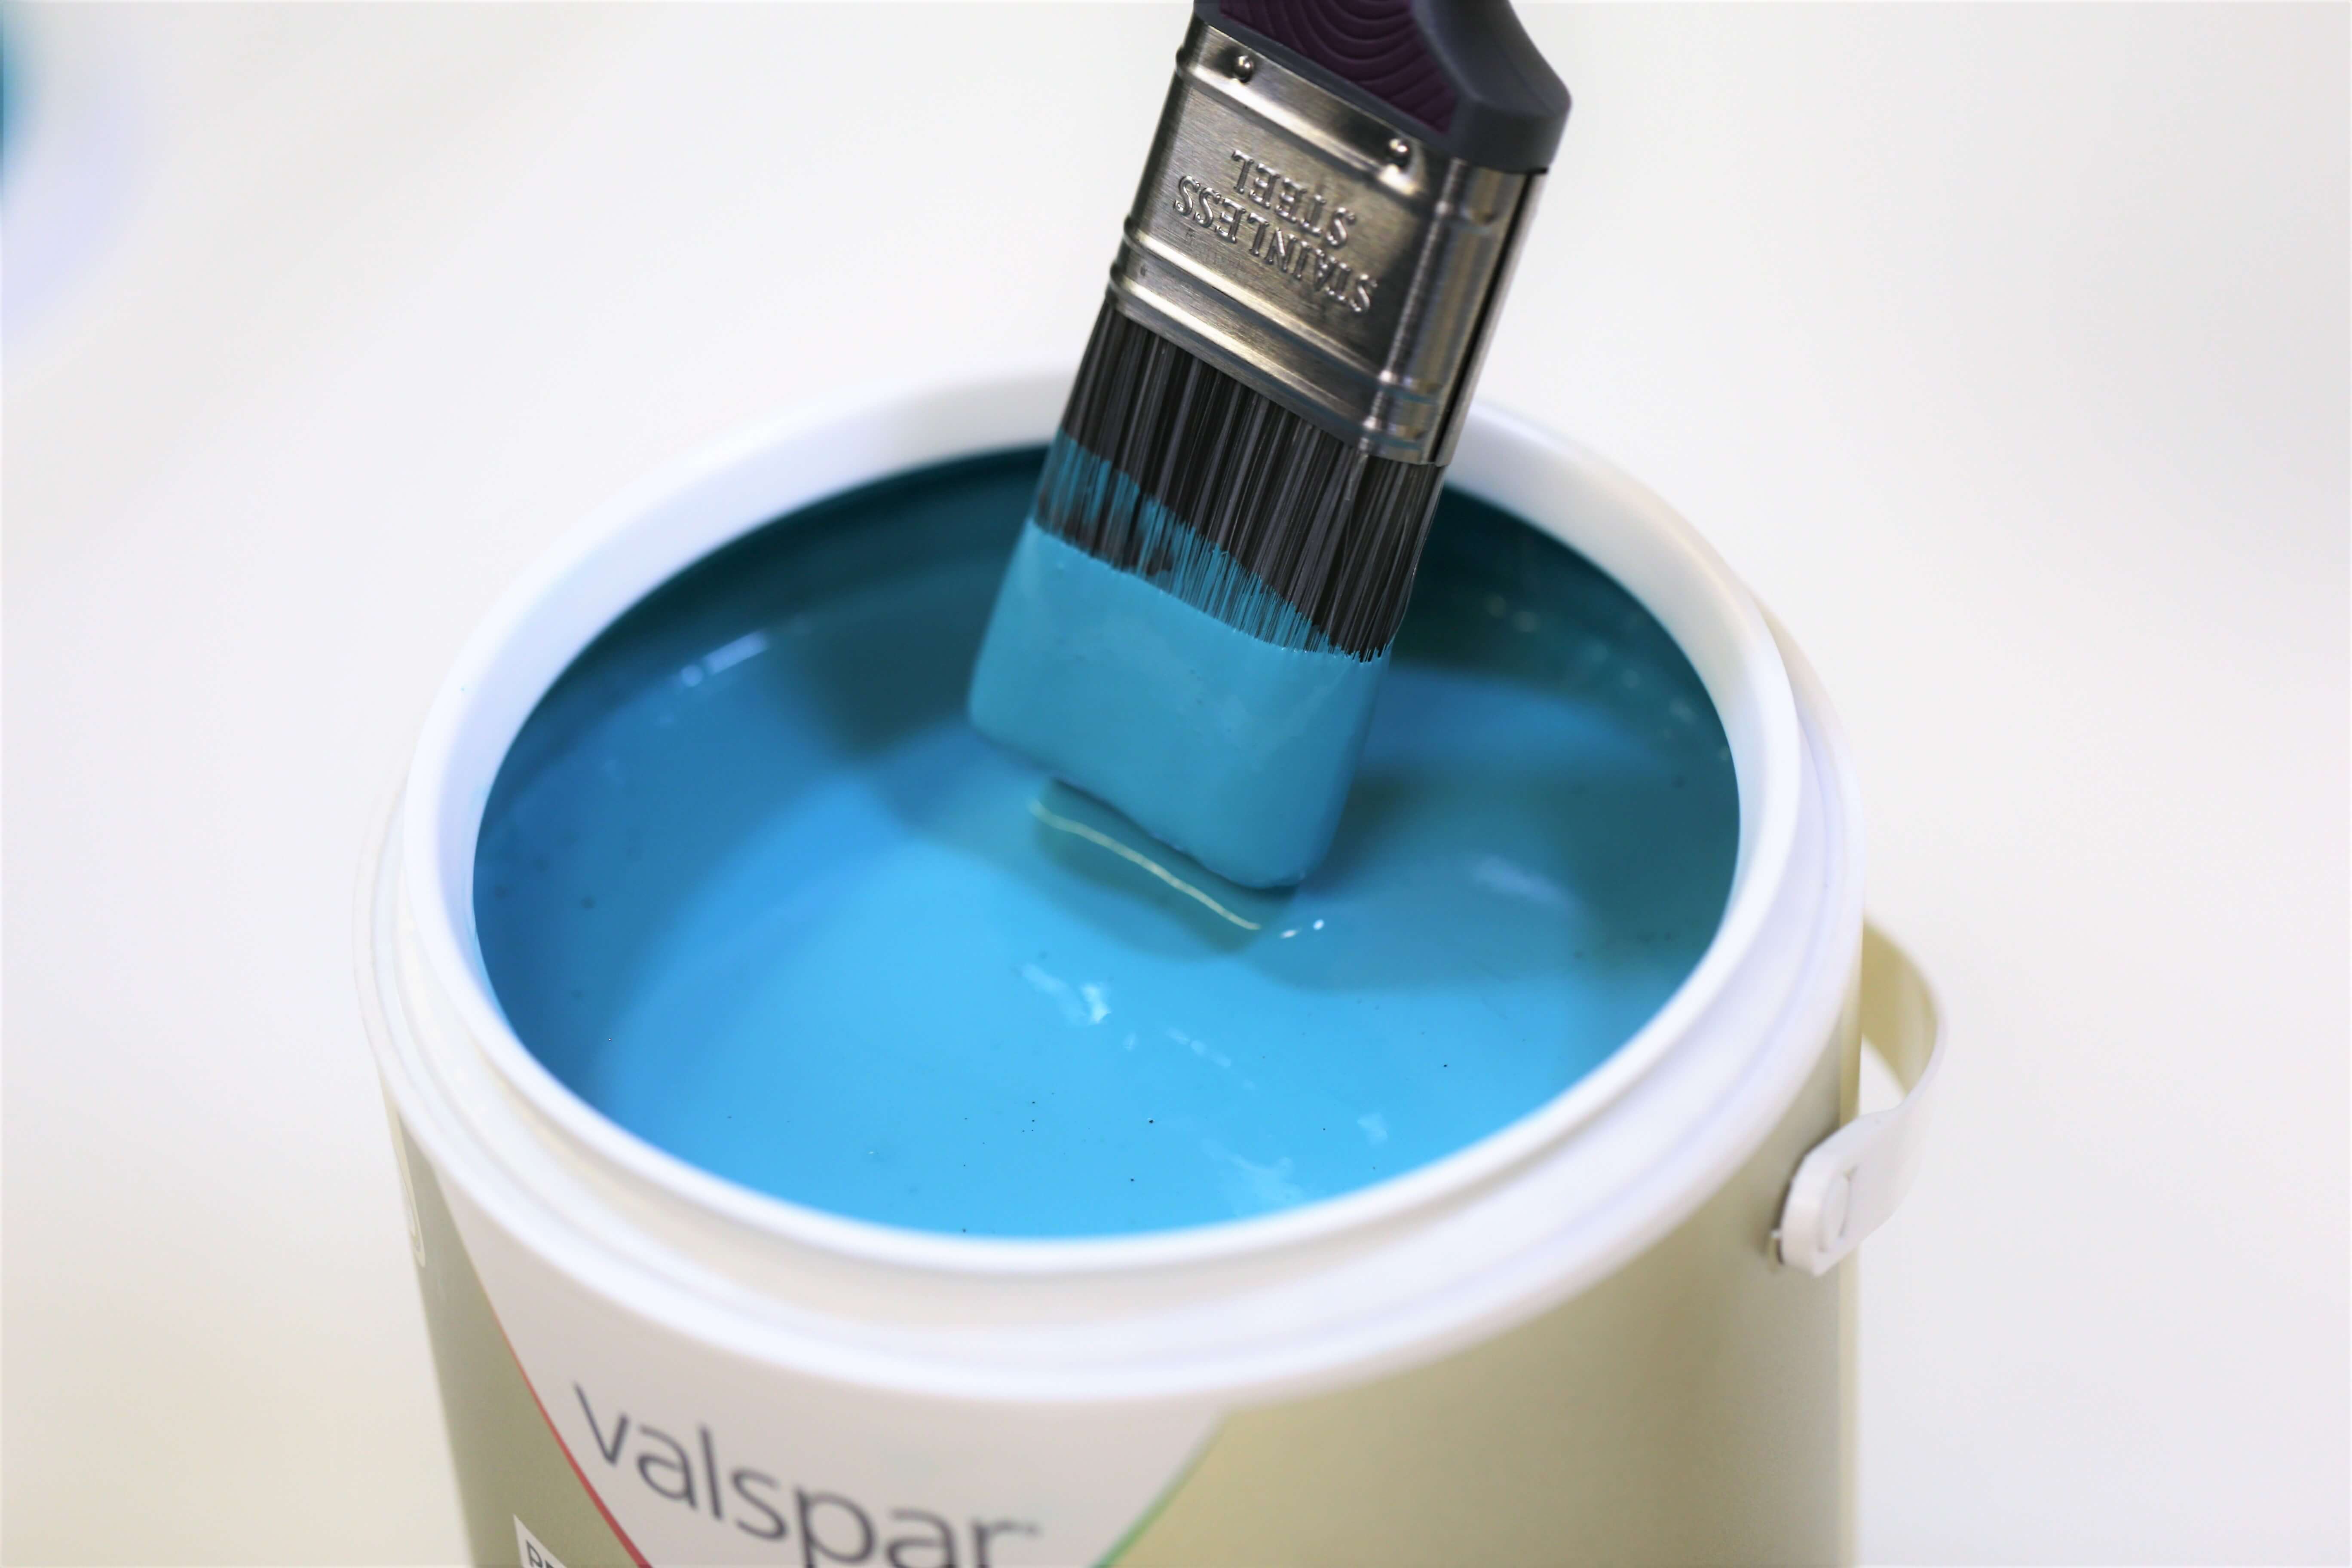 4. Pick your paint carefully